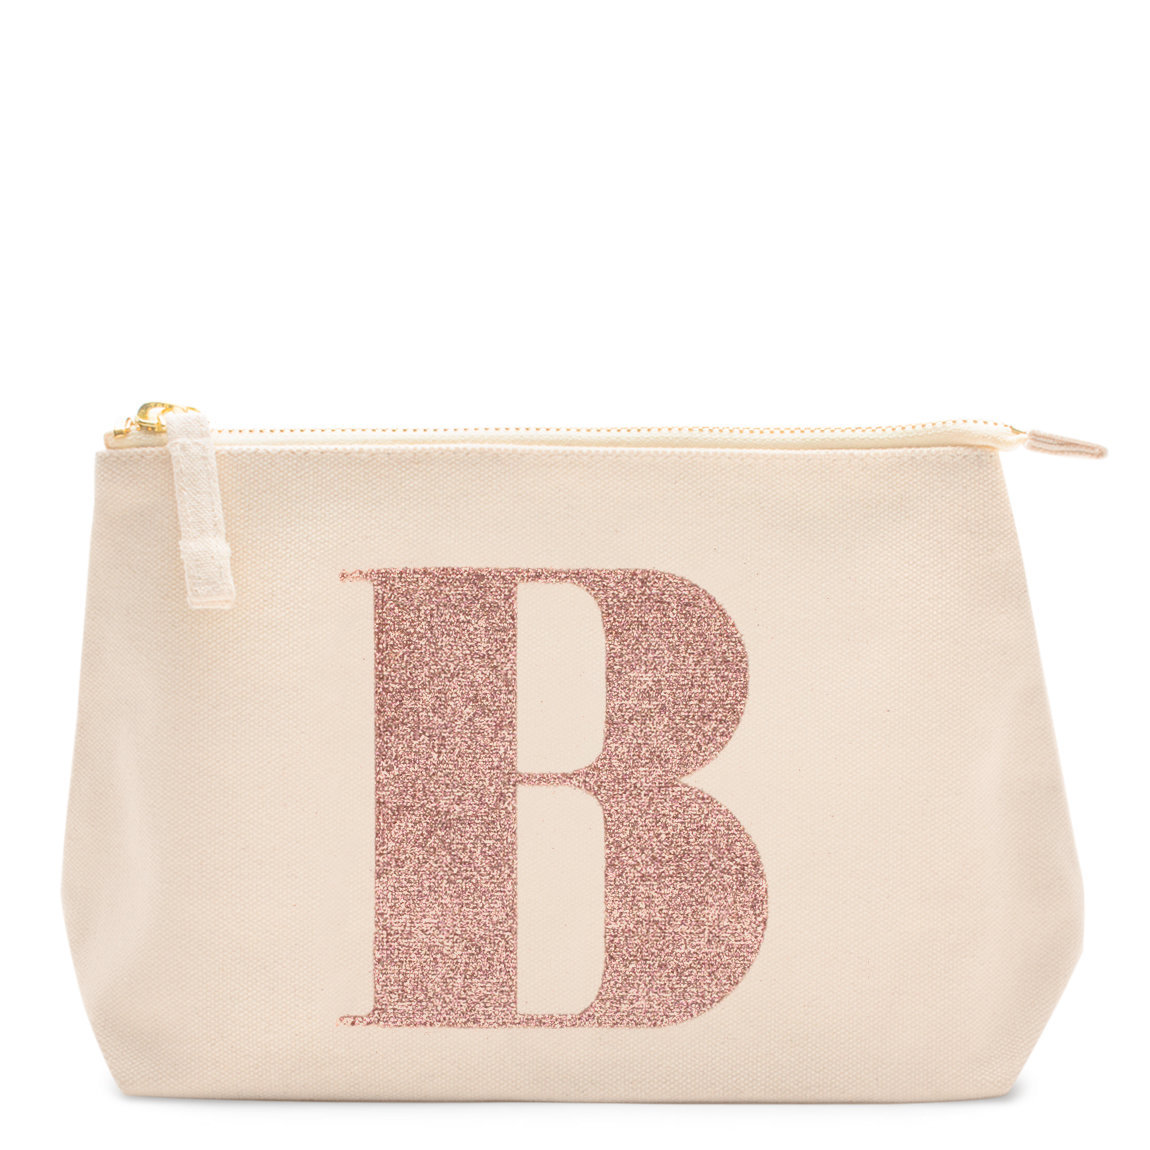 Alphabet Bags Rose Gold Glitter Initial Makeup Bag Letter B alternative view 1 - product swatch.